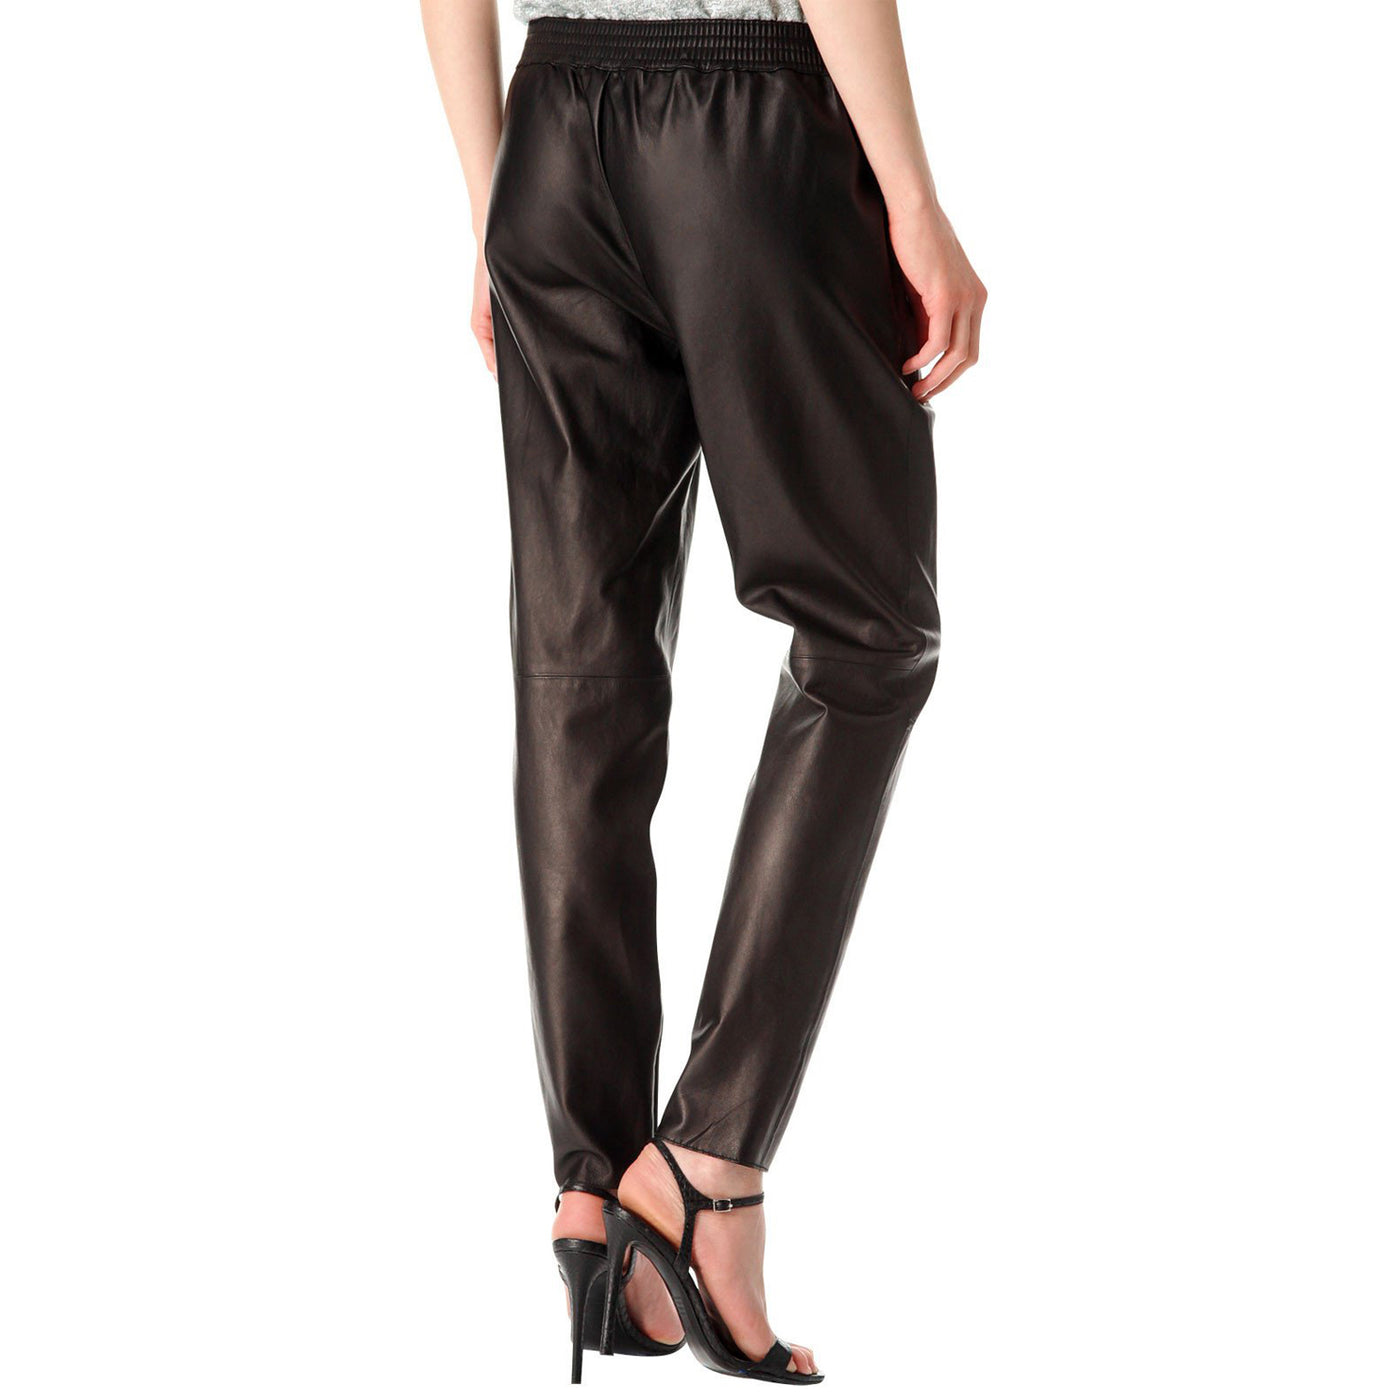 Brown leather pants with elastic waist (style #5) - Lusso Leather - 2